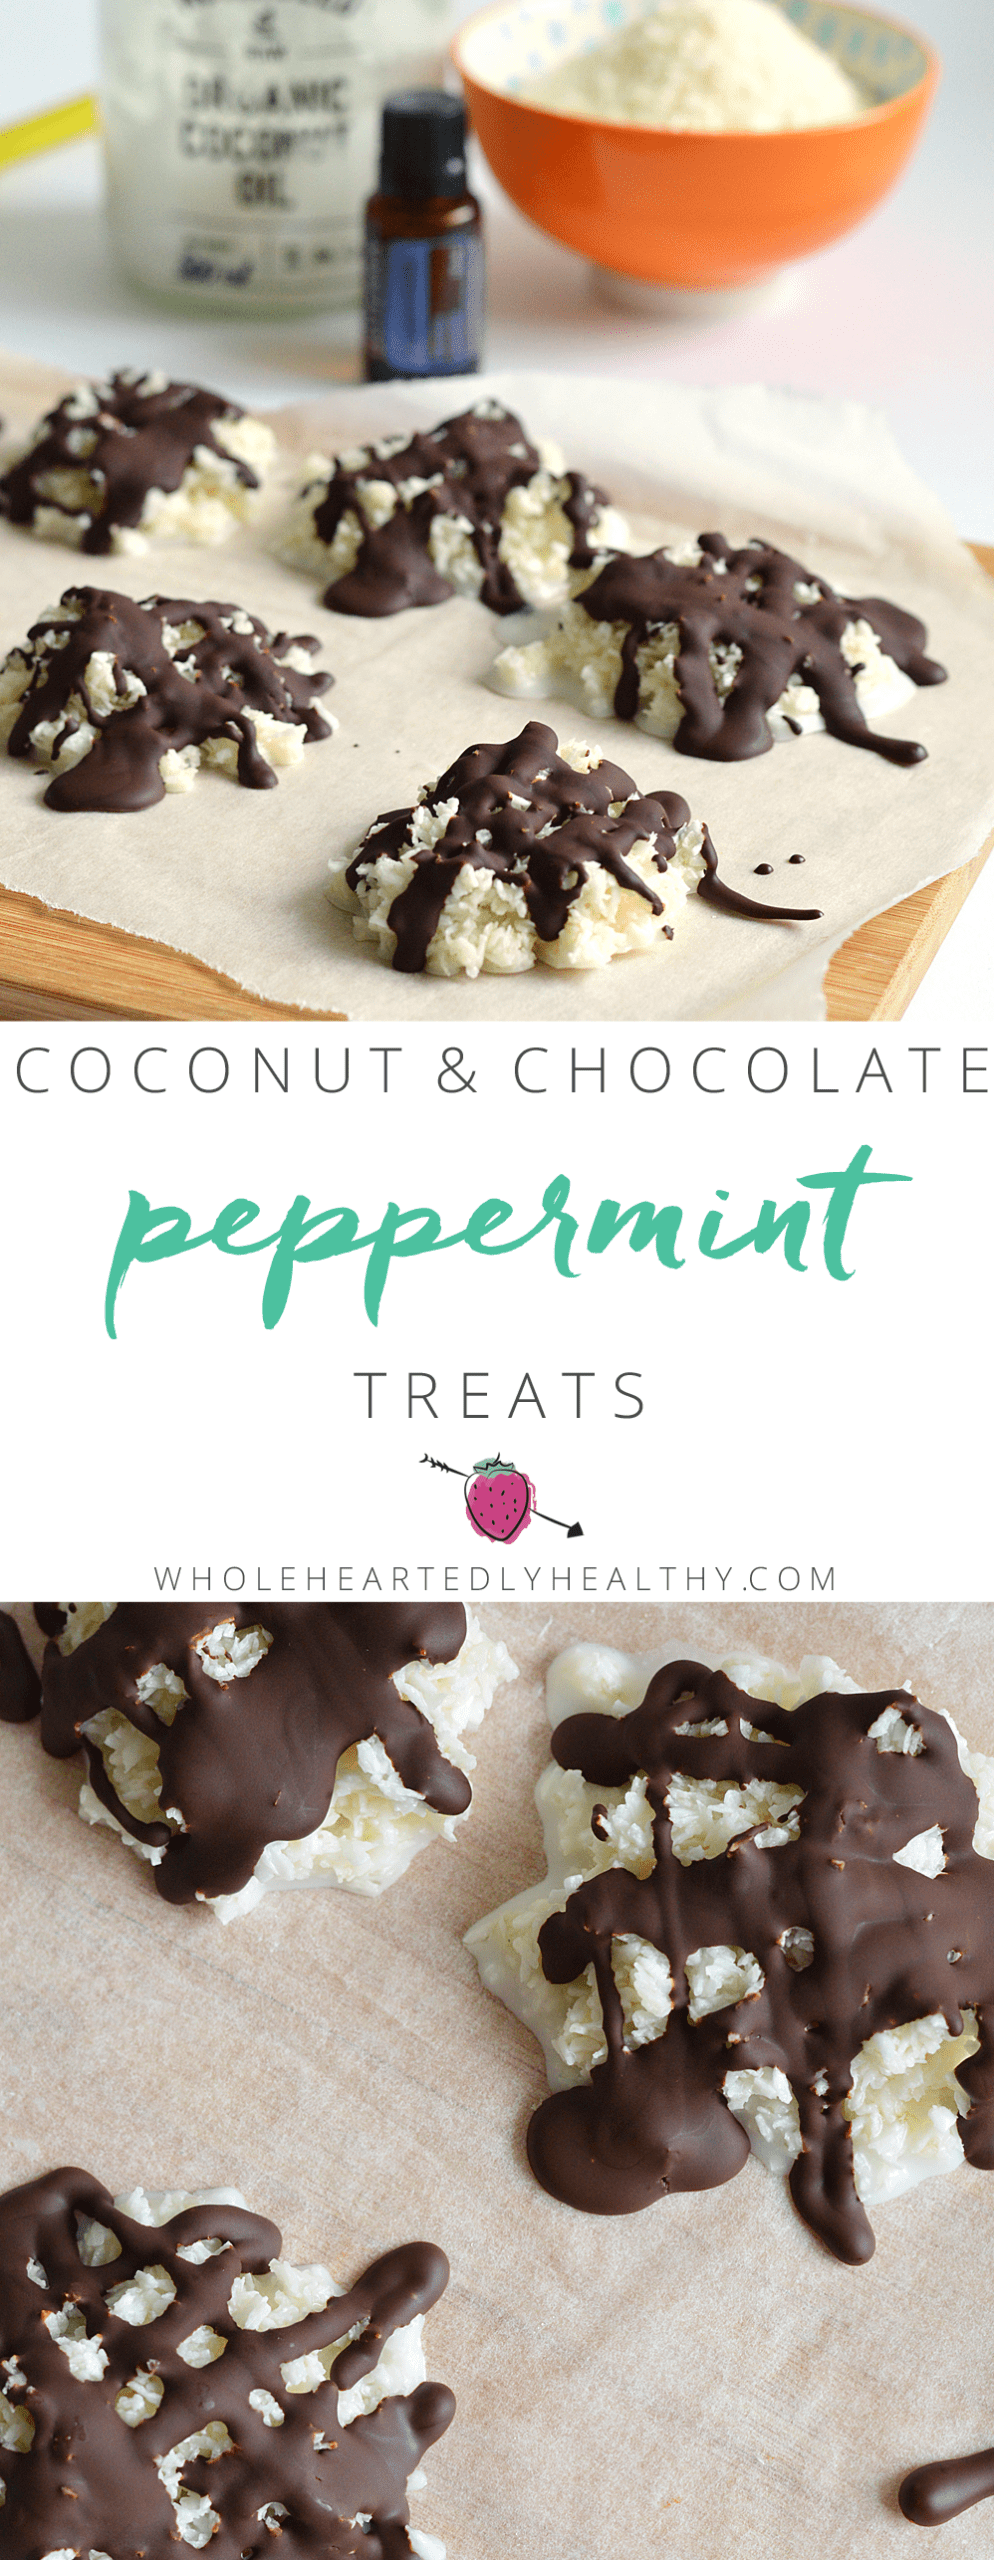 Coconut and chocolate peppermint treats: healthy peppermints